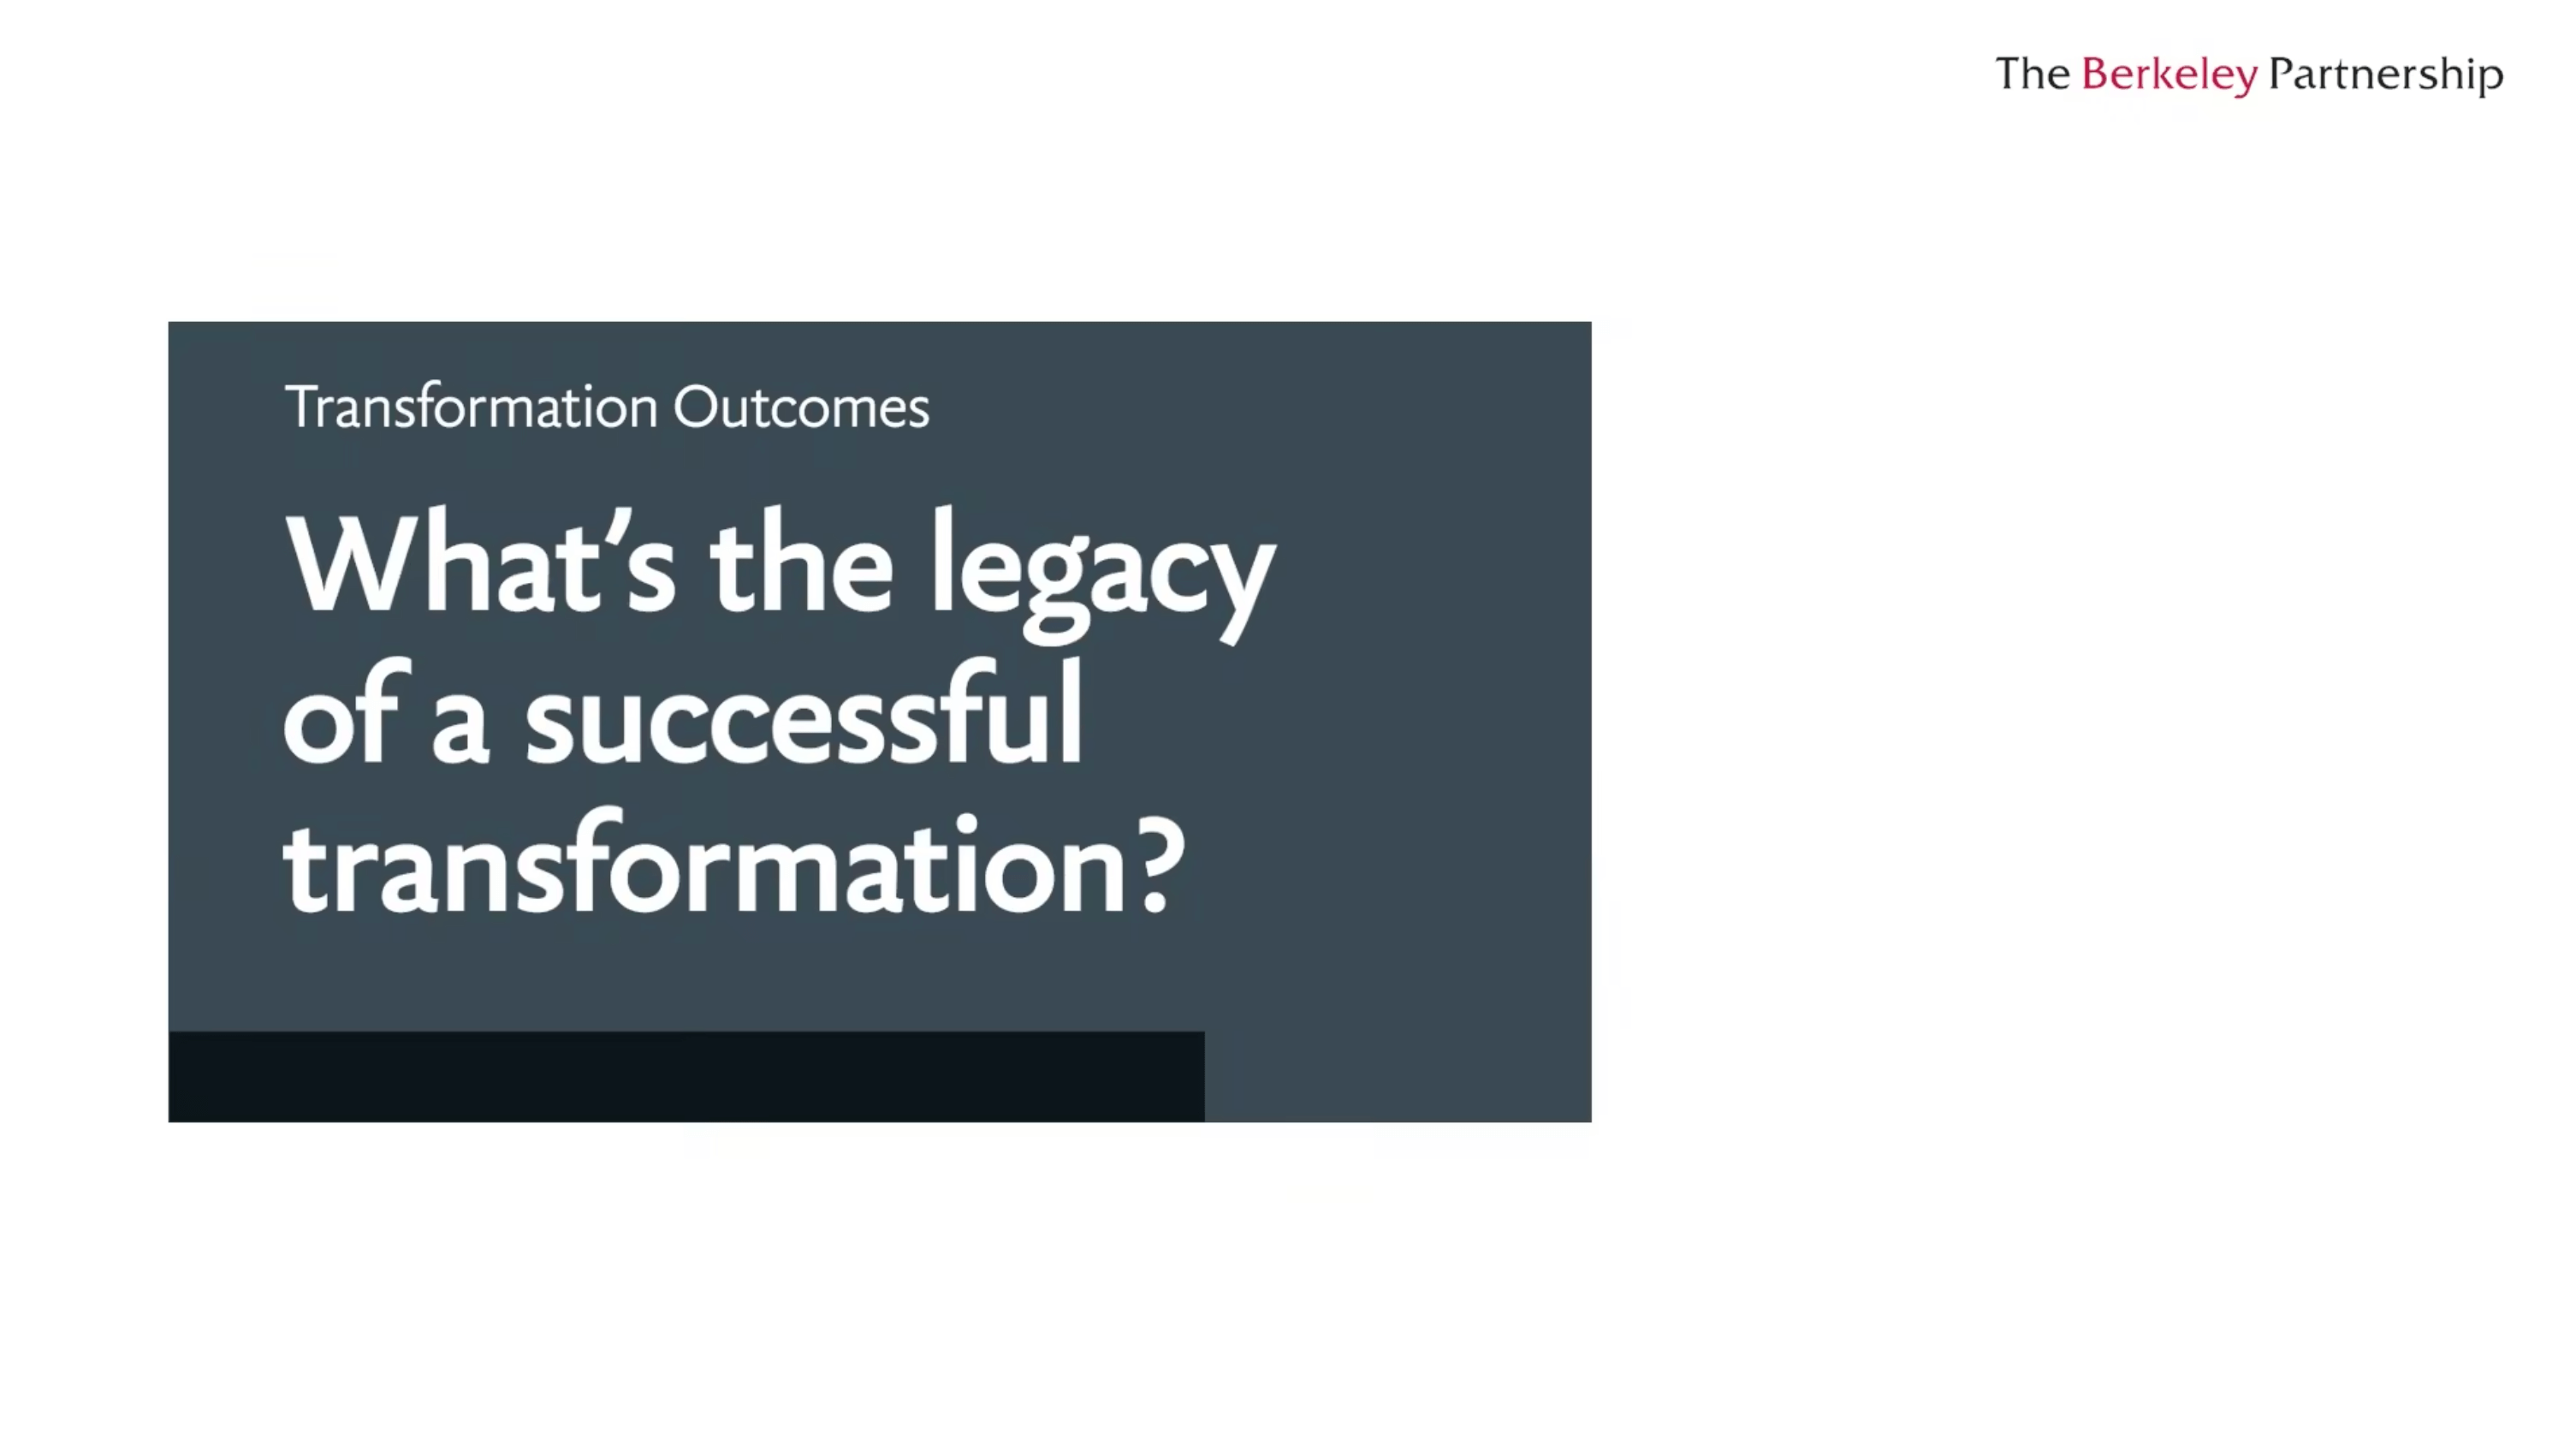 Transformation outcomes: What's the legacy of a successful transformation?